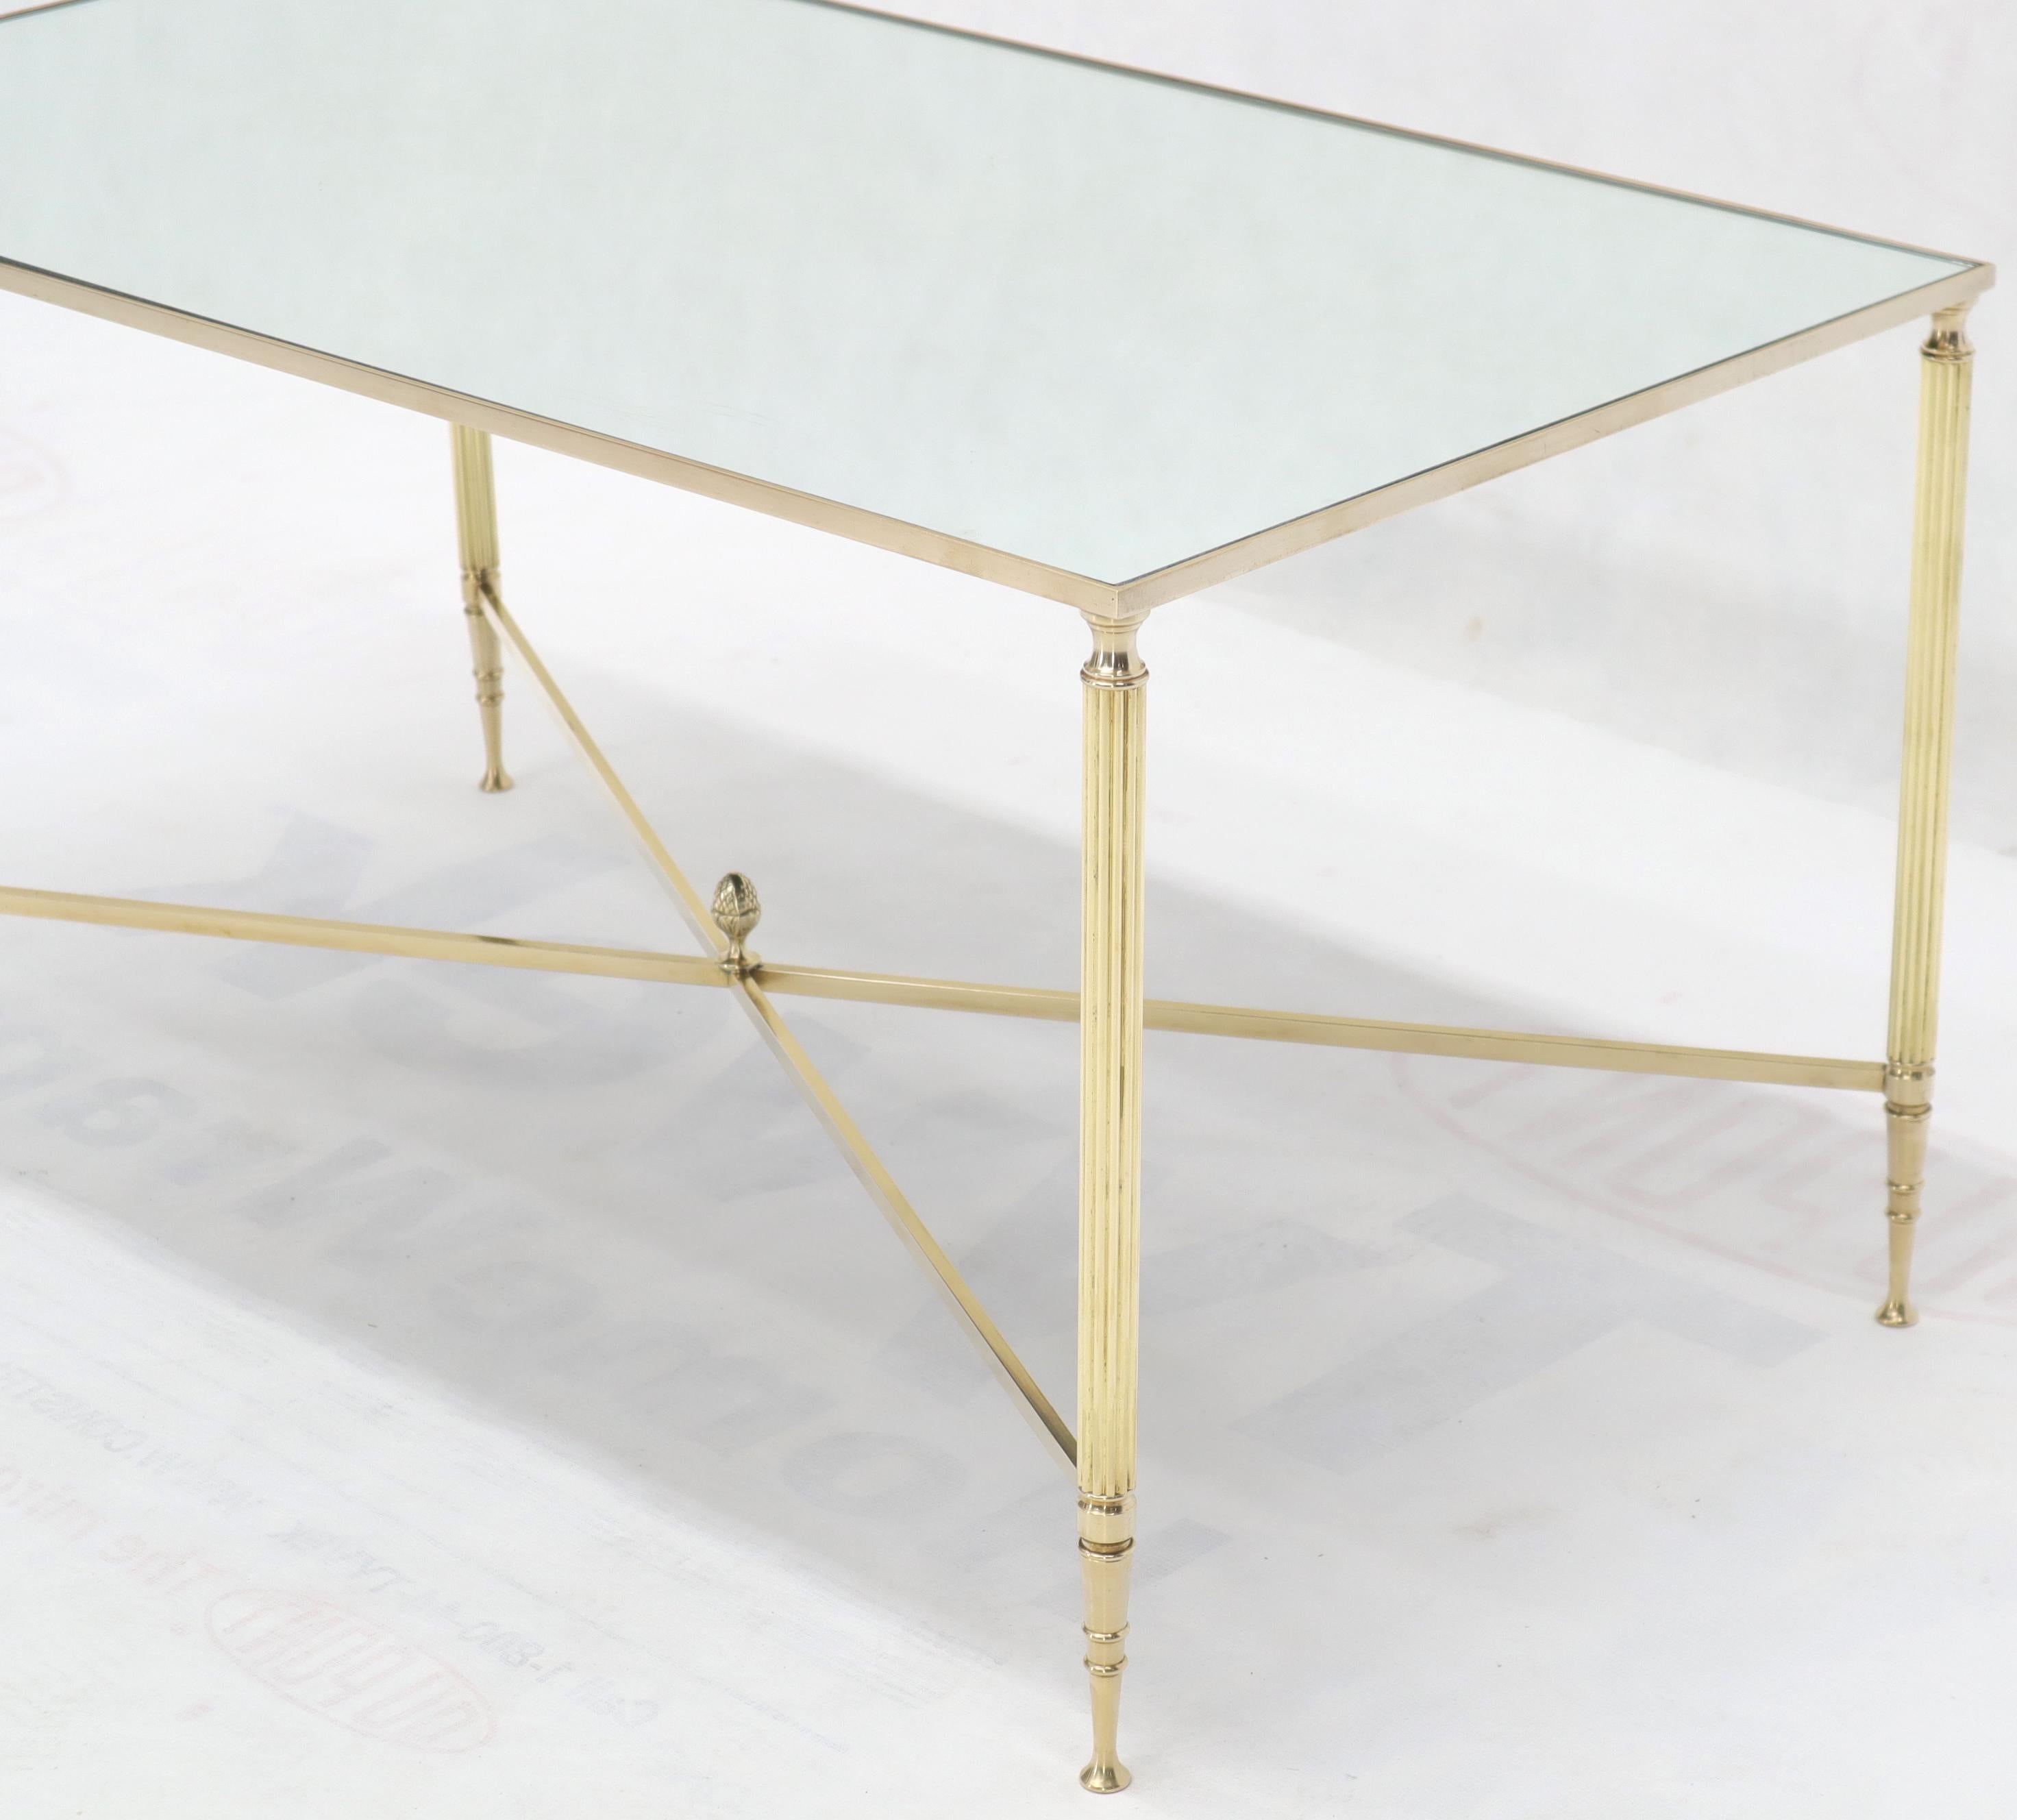 Polished Brass X-Stretcher Base Fluted Legs Mirrored Glass Top Coffee Table In Excellent Condition For Sale In Rockaway, NJ